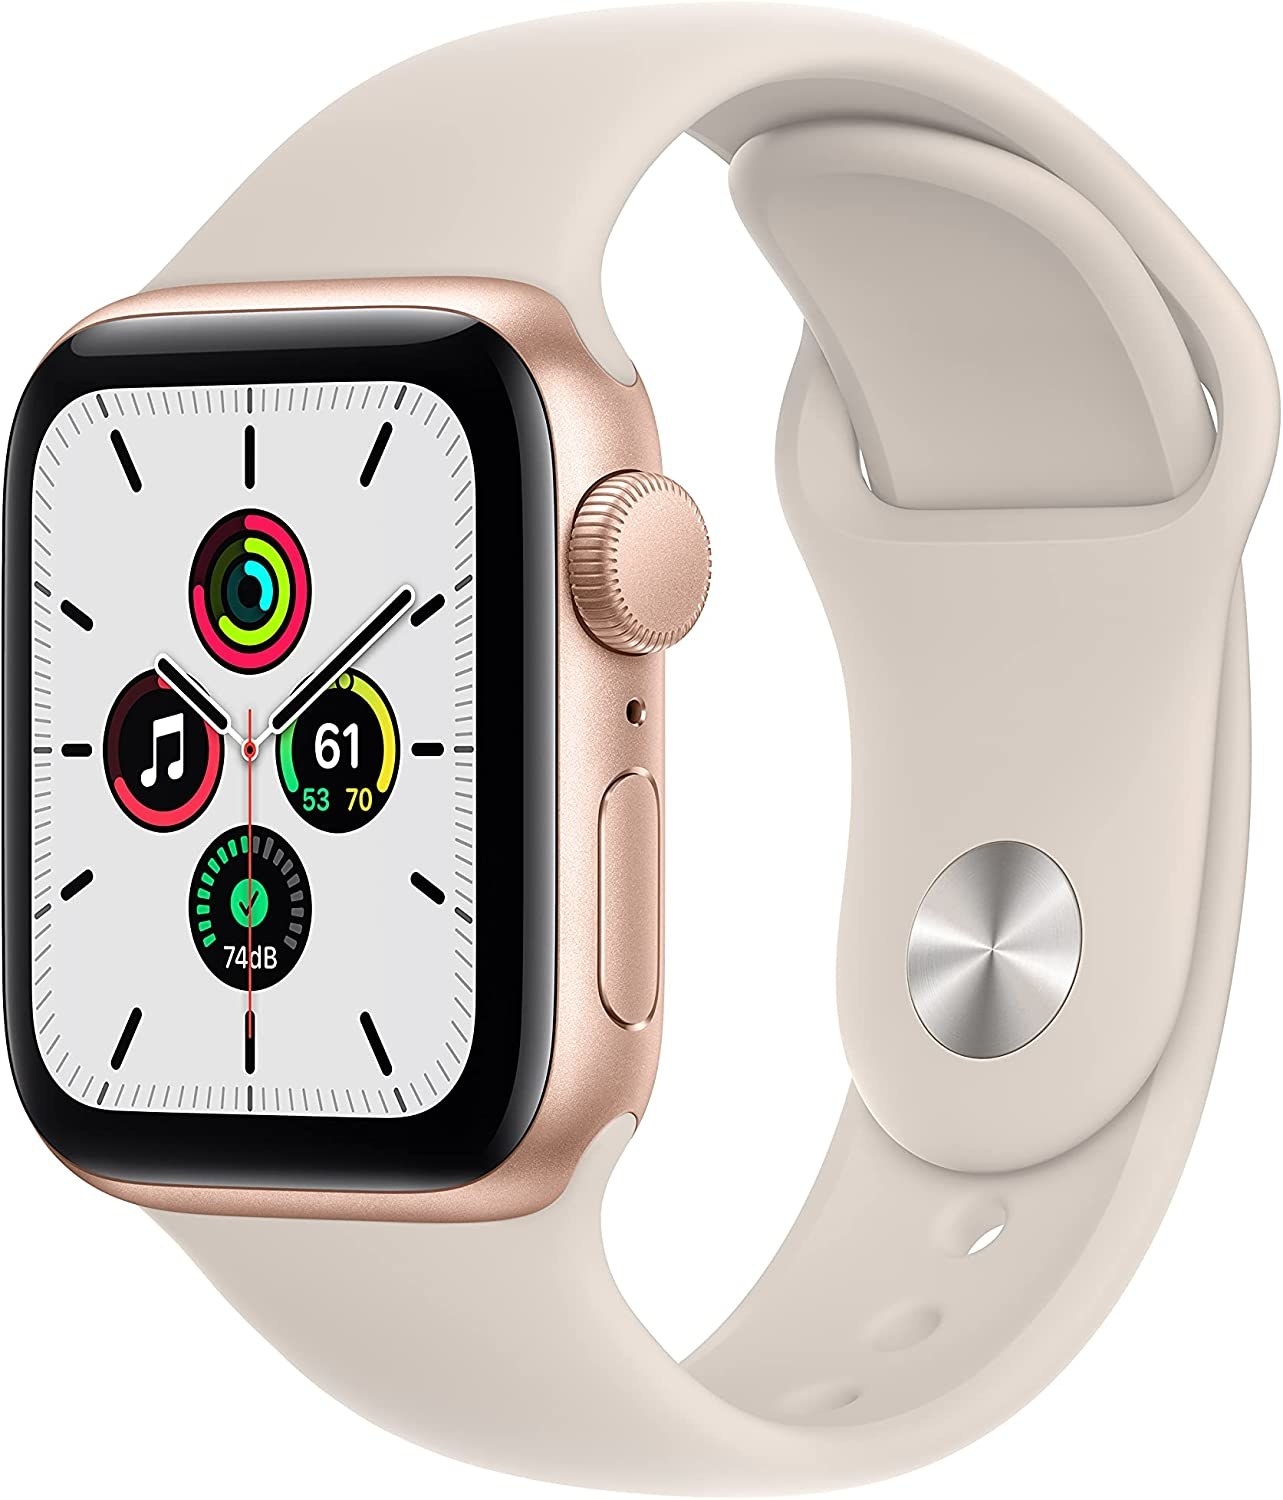 the apple watch with a pale pink band